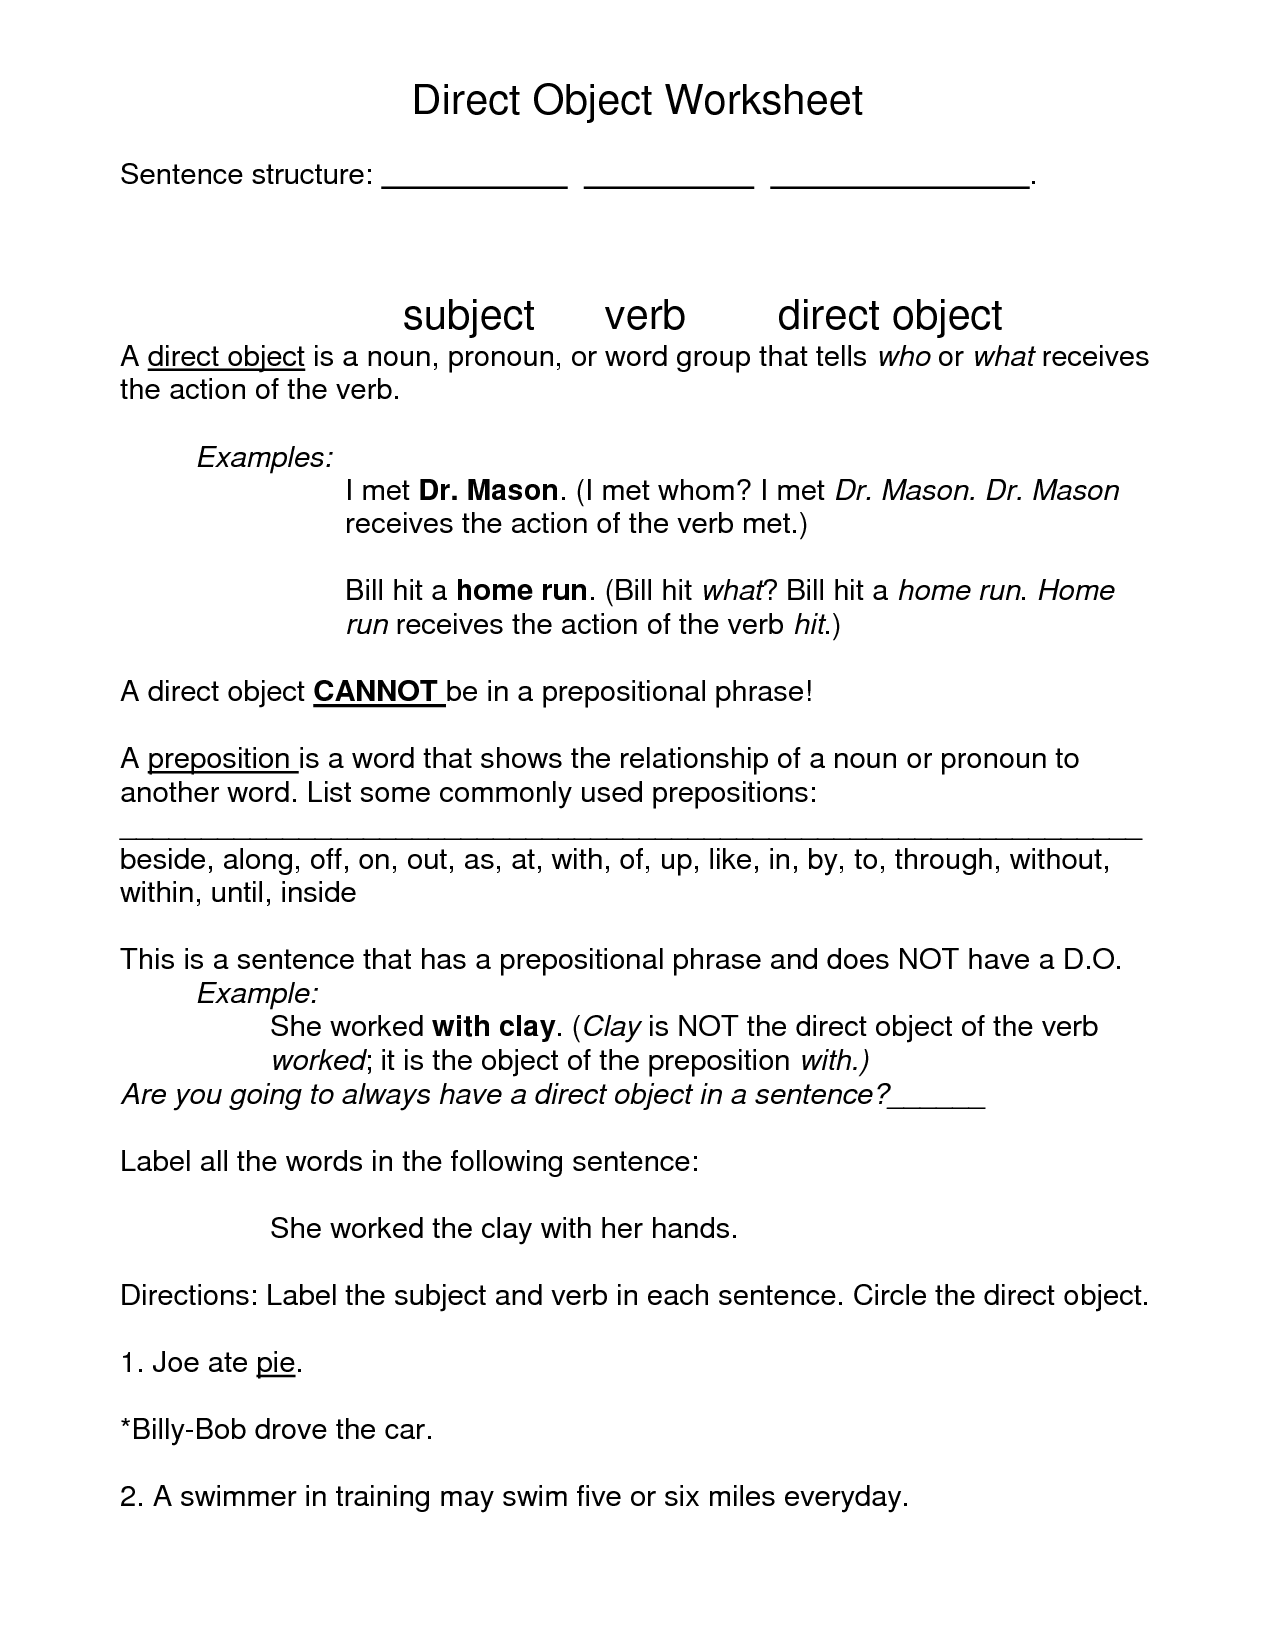 worksheets-on-direct-and-indirect-objects-mreichert-kids-worksheets